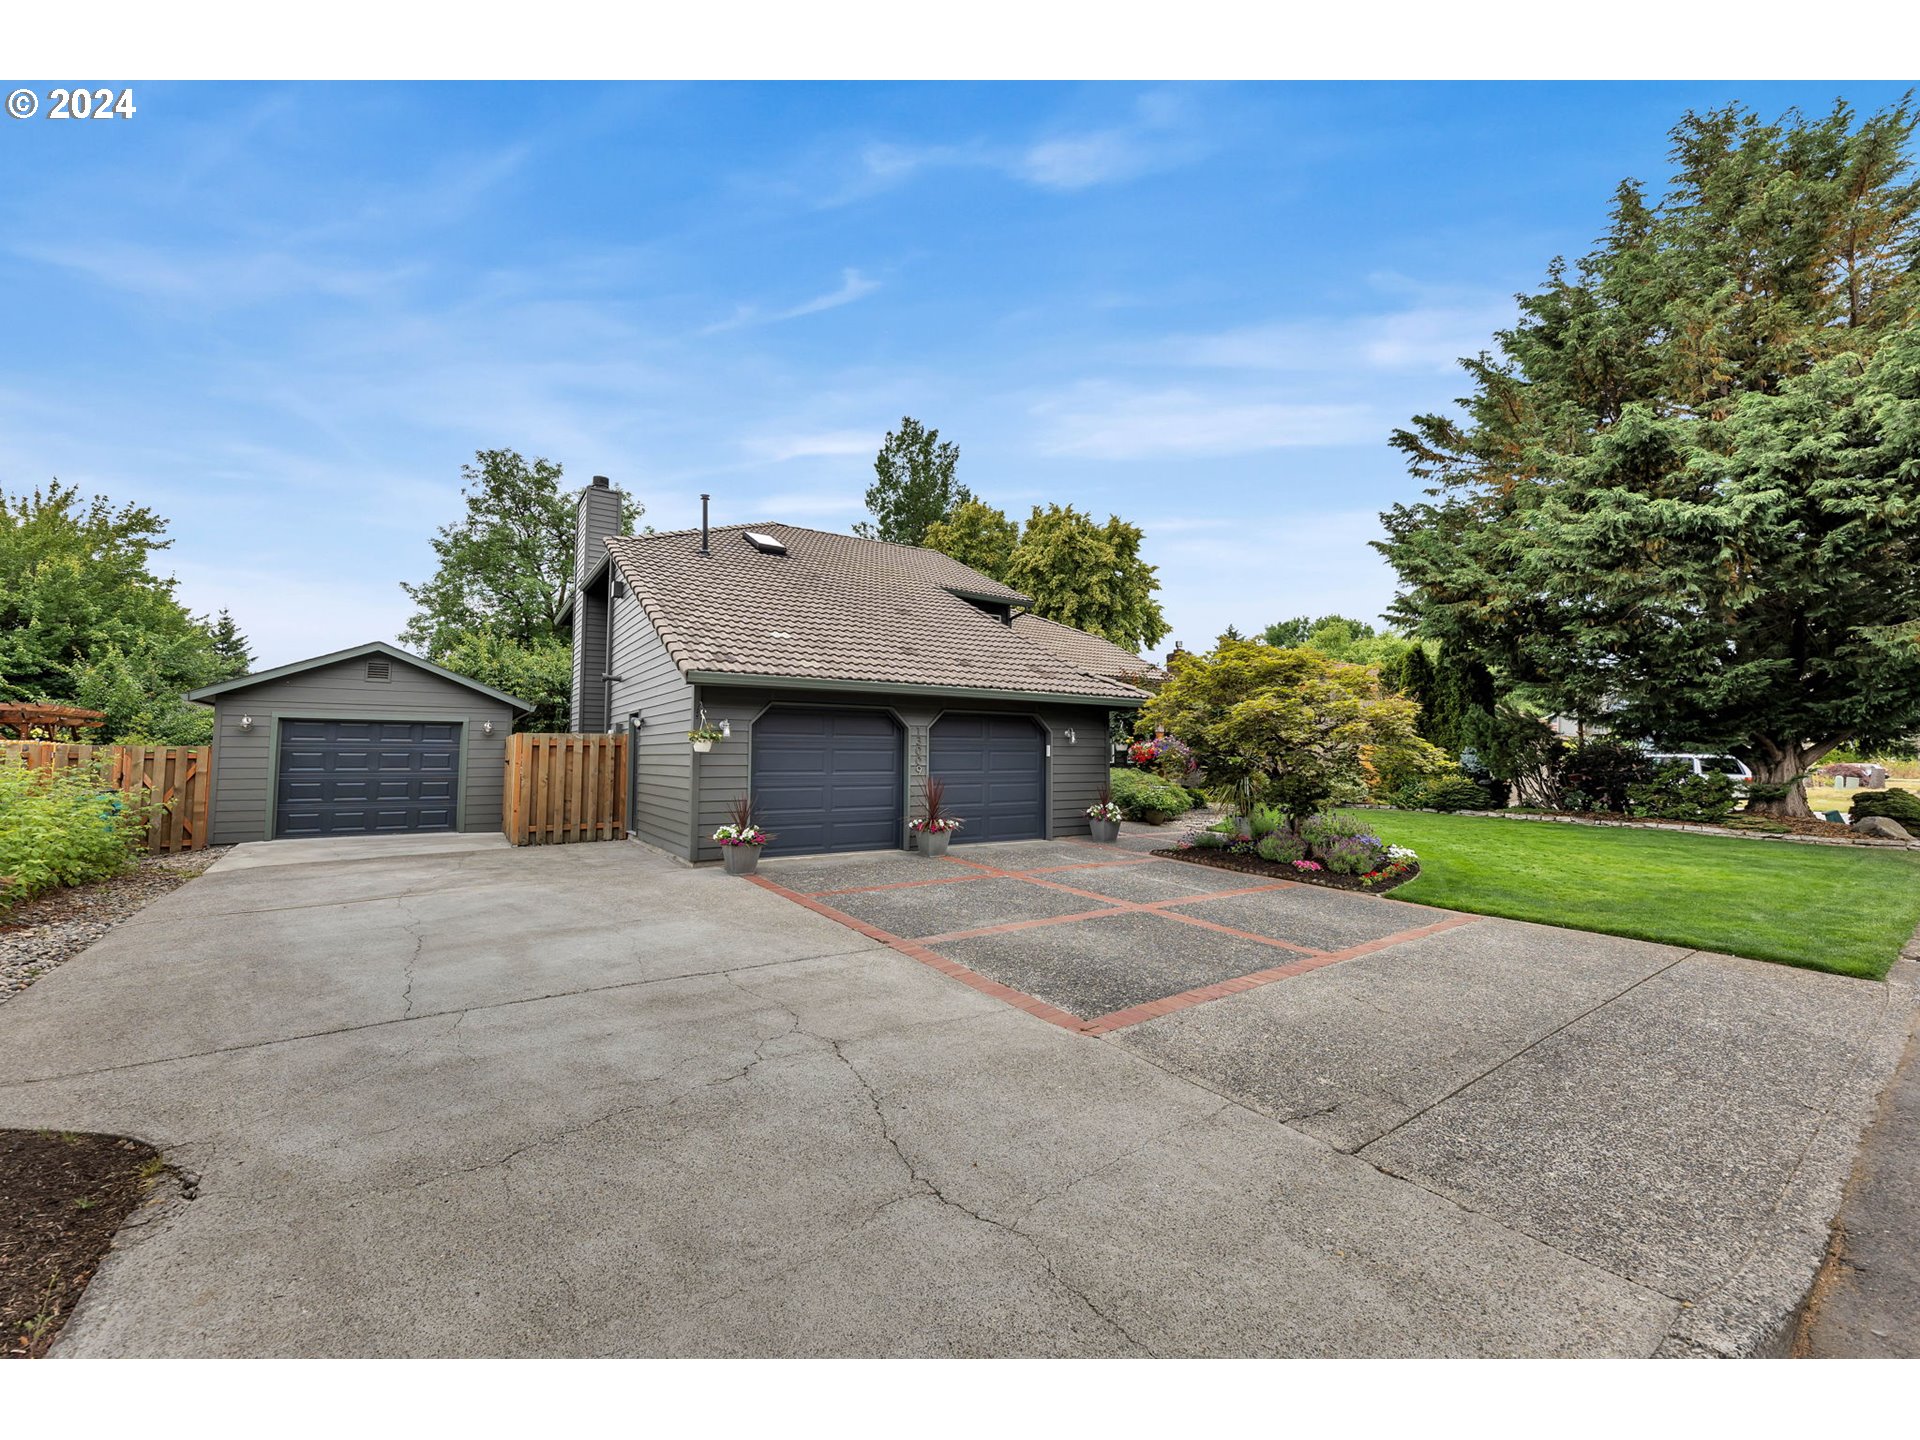 13009 SE Forest St, Vancouver, WA 98683